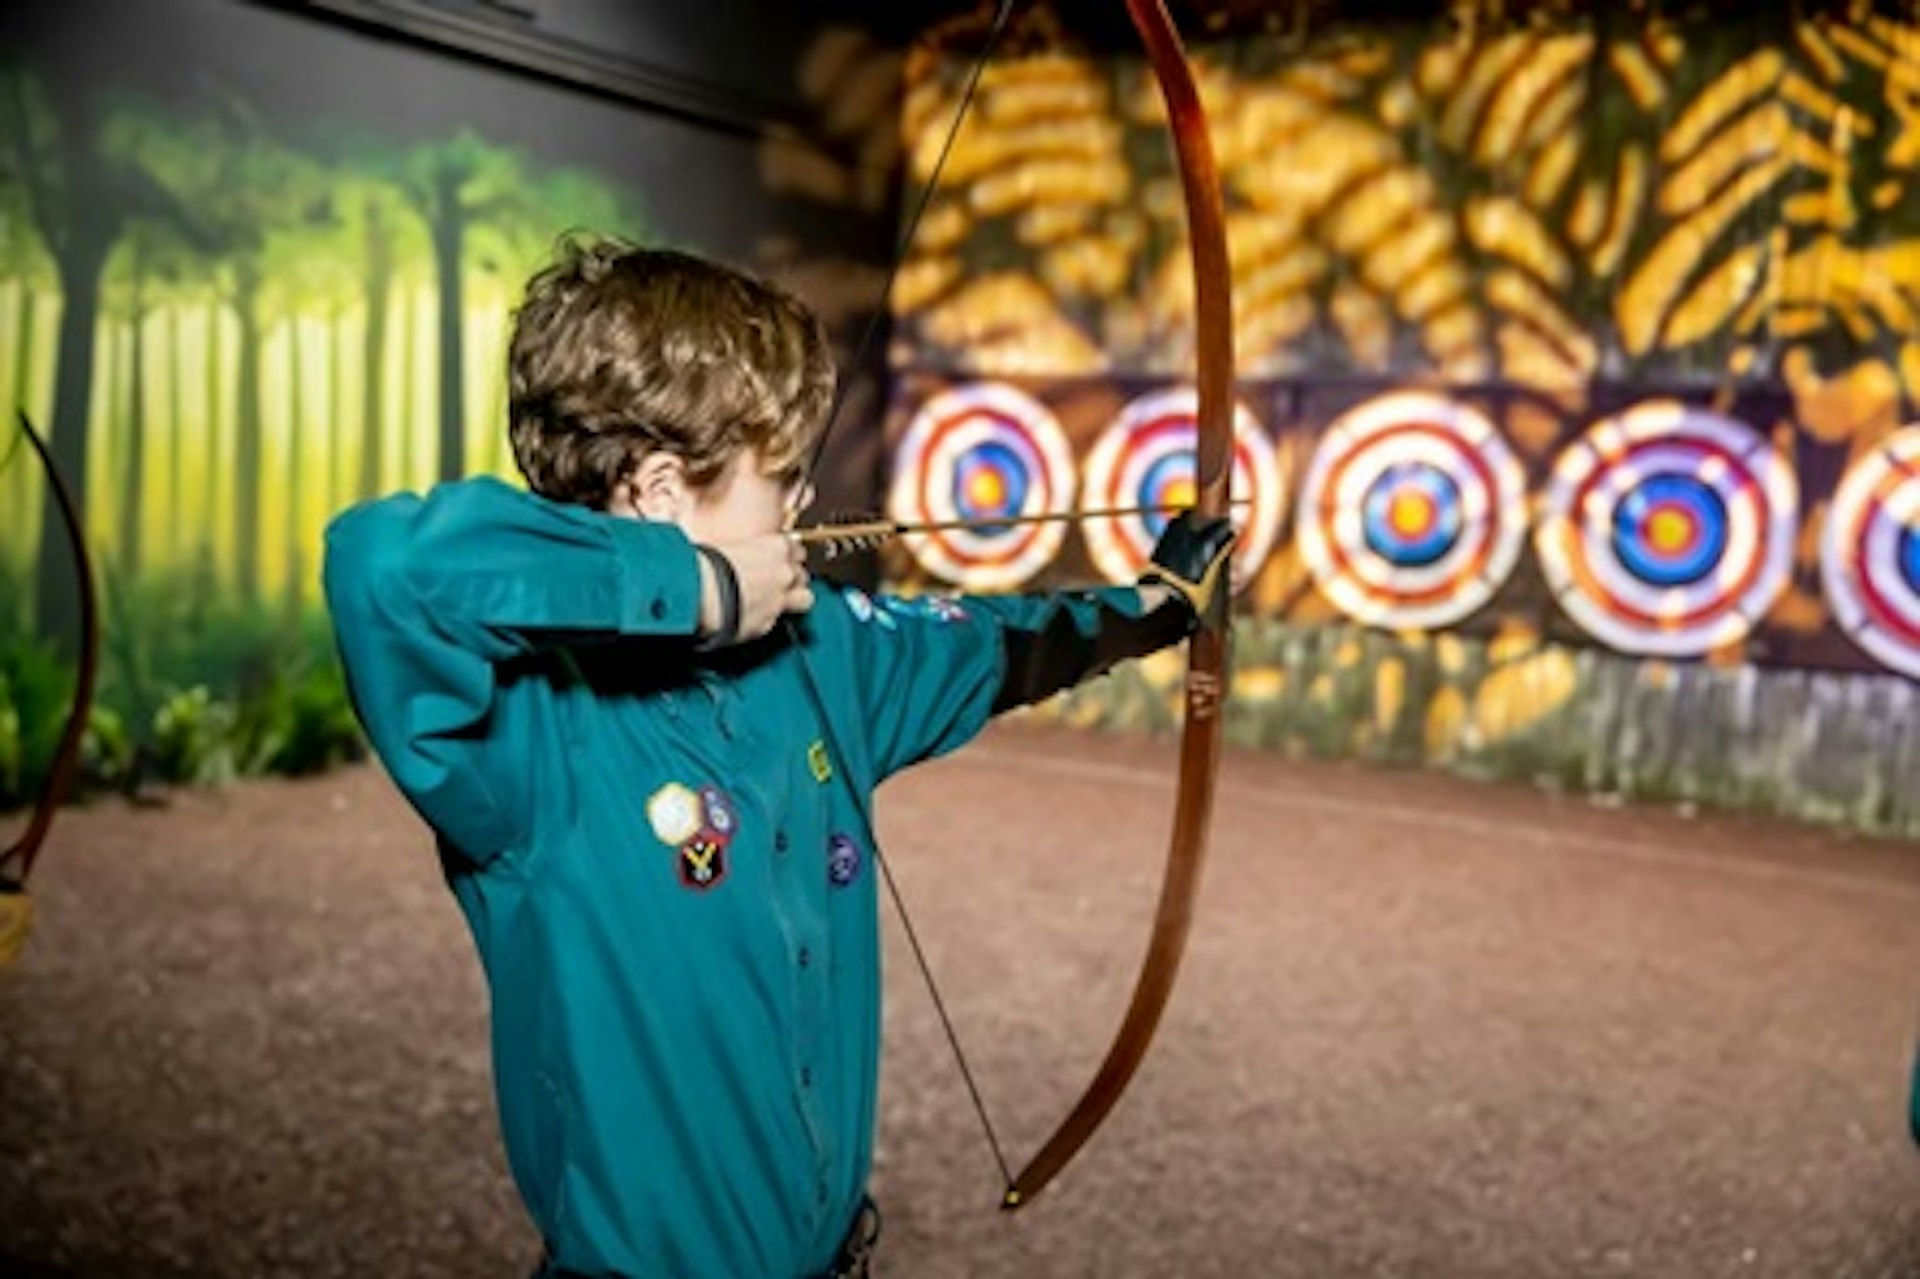 Climbing and Archery Experience at The Bear Grylls Adventure 2